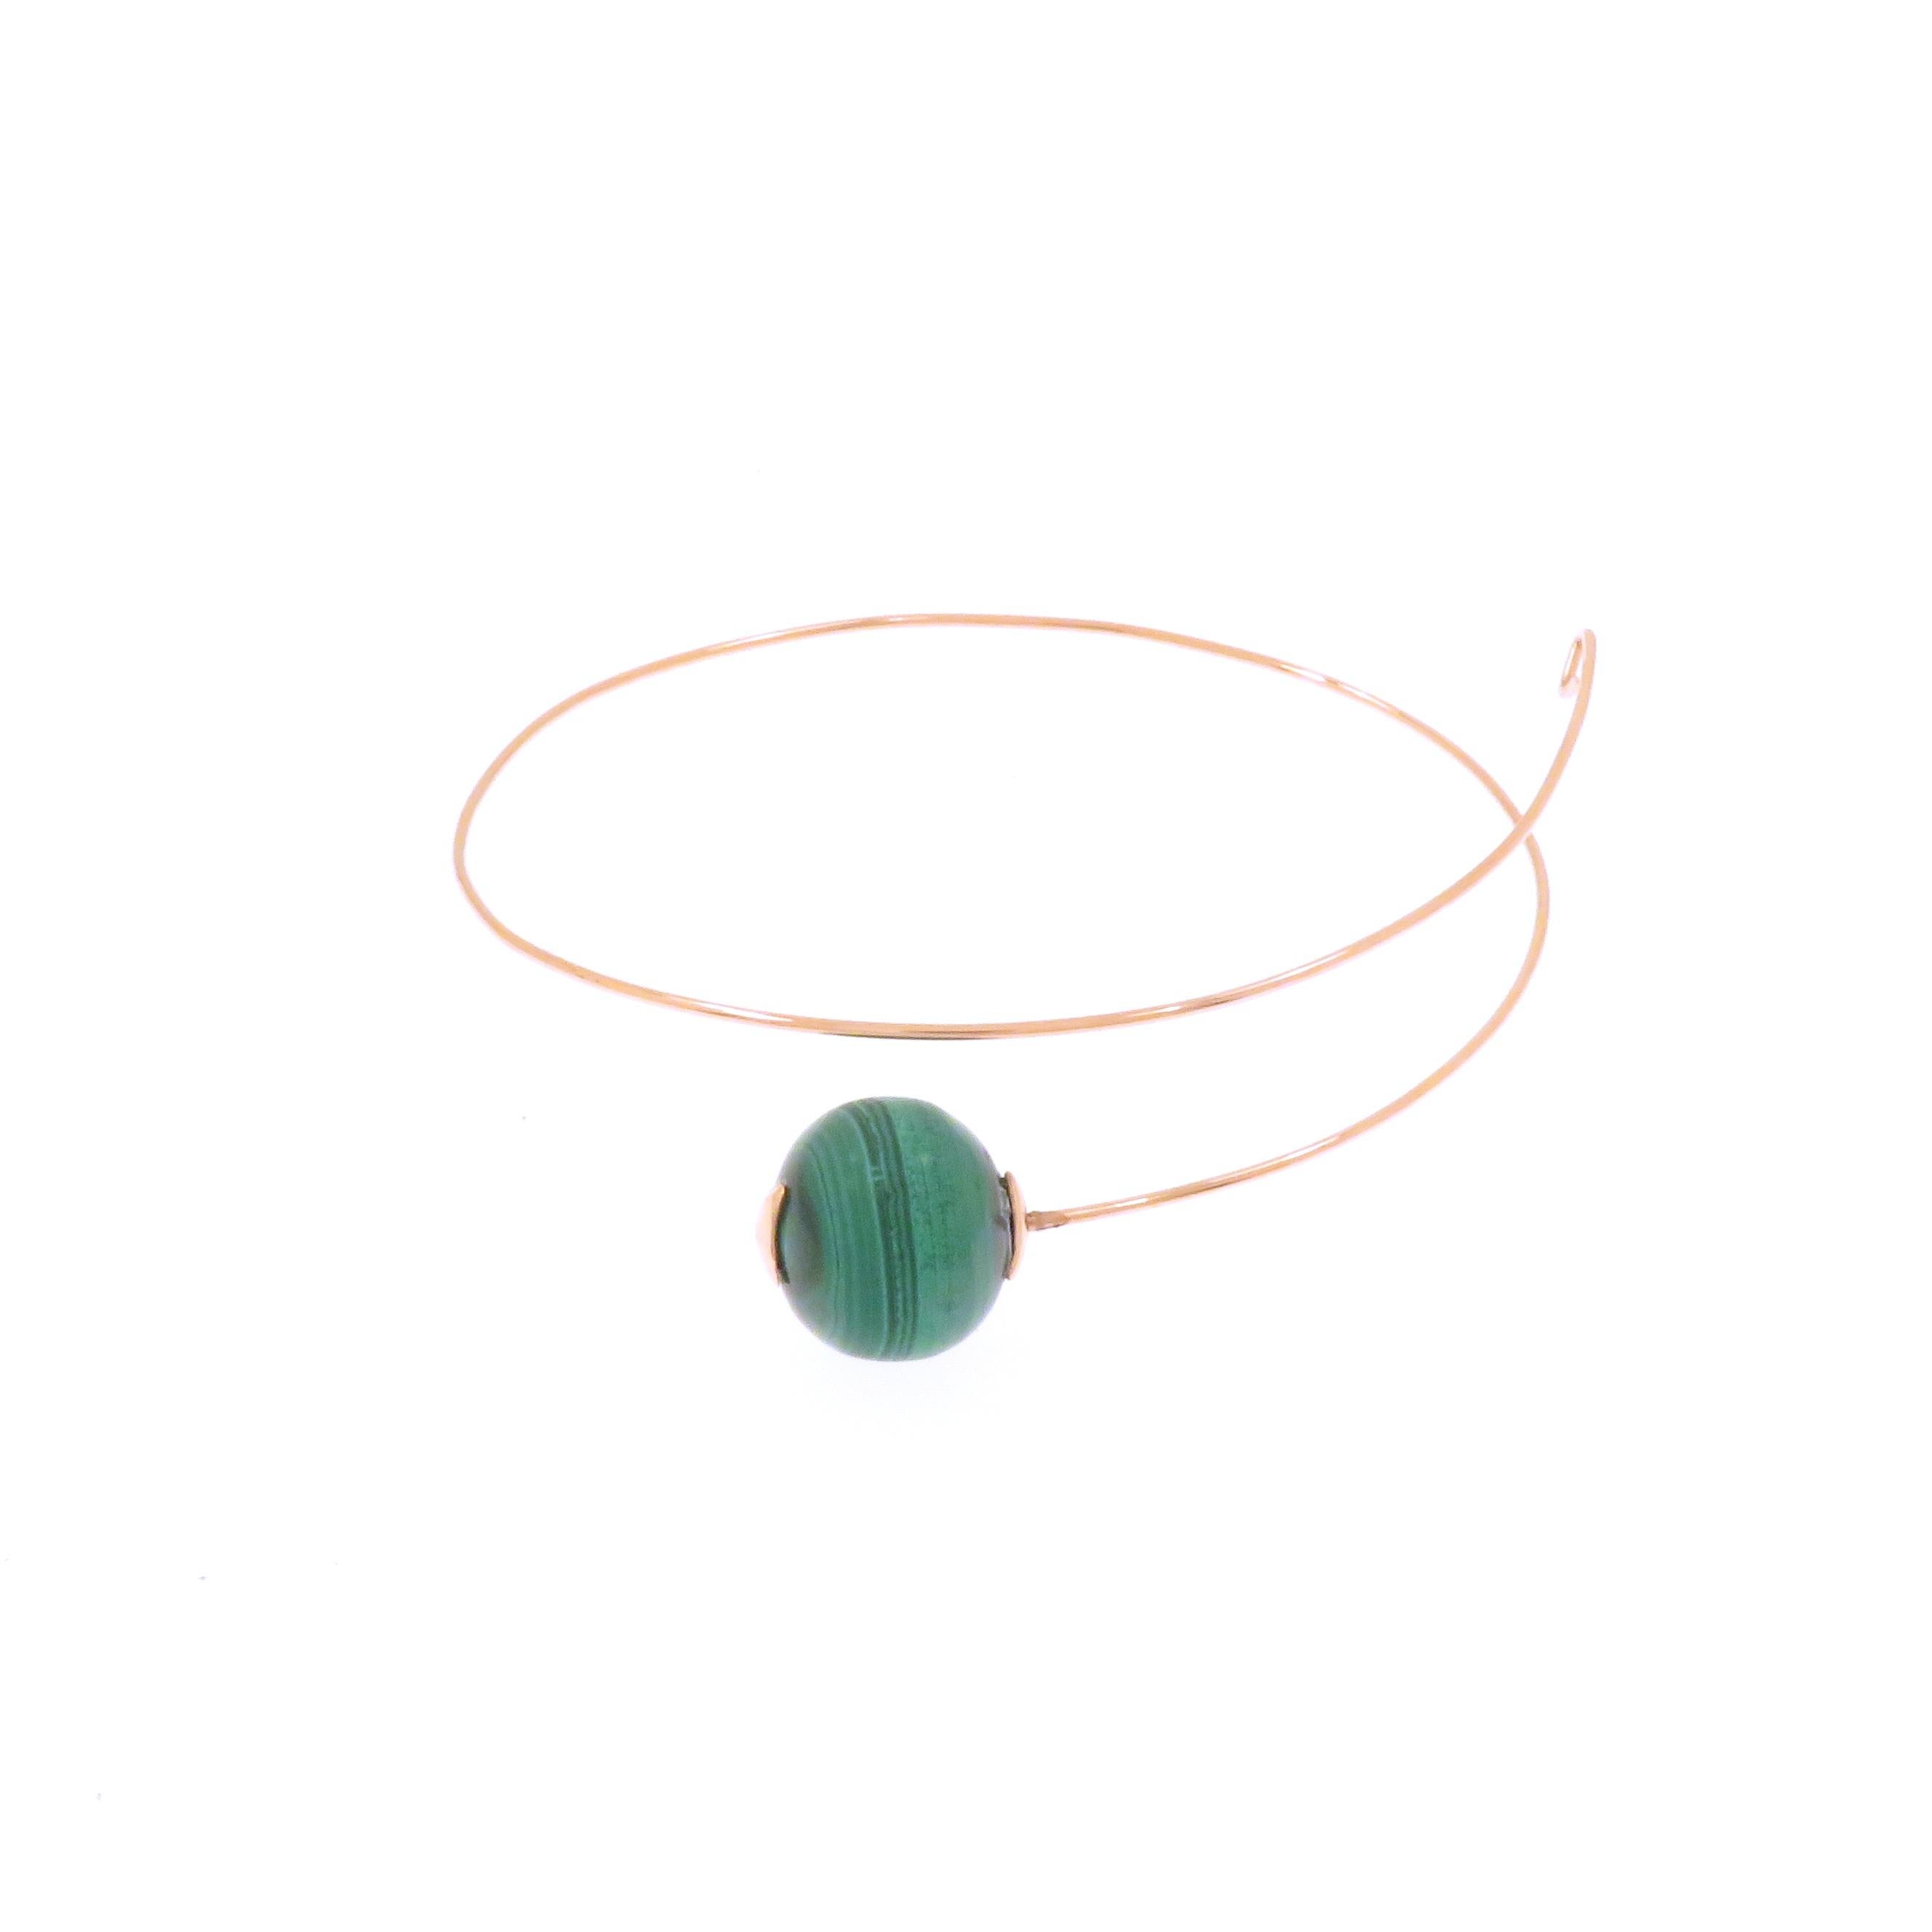 Beautiful cuff bracelet crafted in 9 karat rose gold featuring 1 bead cut malachite. The inner size is 56x54 mm / 2.204x2.125 inches. Marked with the Italian gold mark 375 and Botta Gioielli brand mark 716MI.

Handcrafted in: 9 karat rose gold.
1